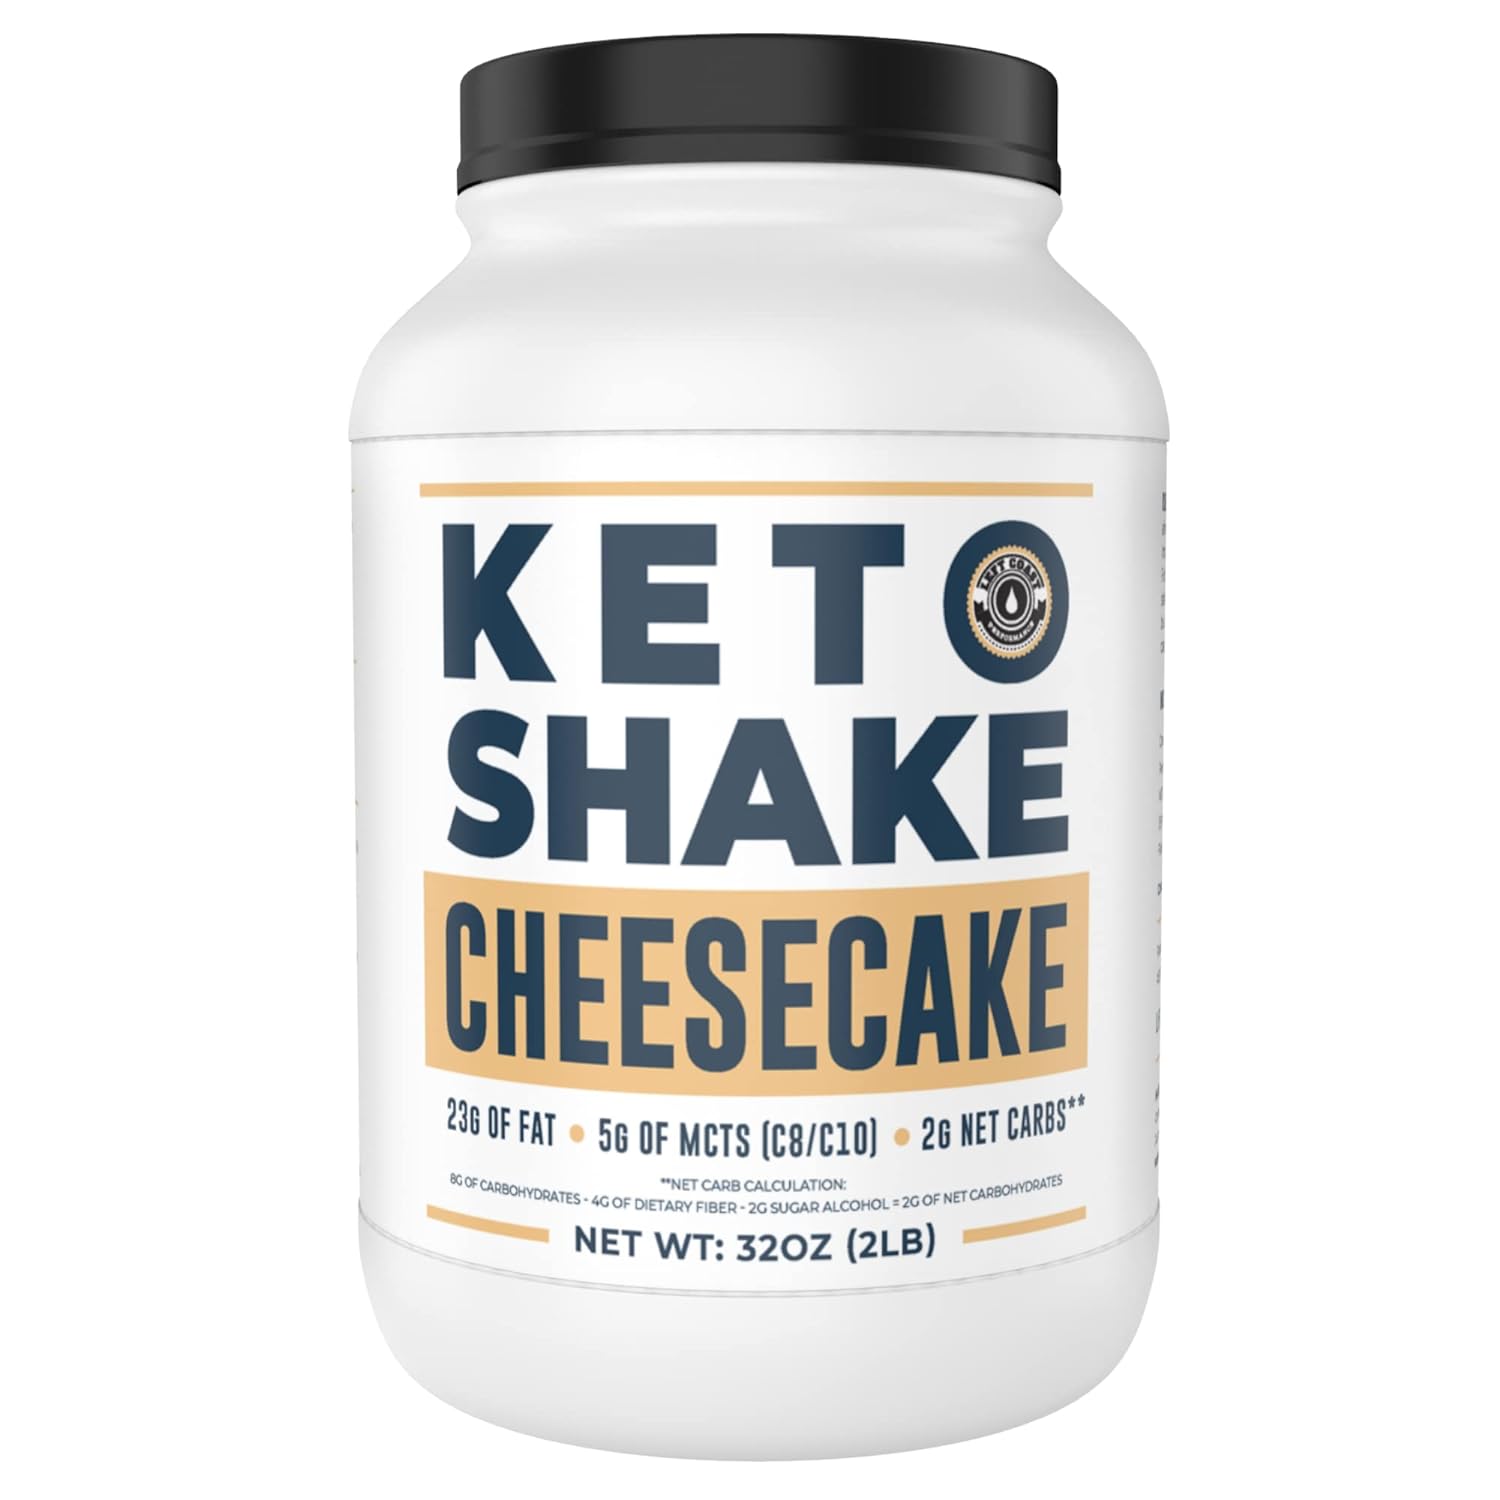 Cheesecake Keto Meal Replacement Shake [2lbs] - Low Carb Protein Powder Shake Mix, High Fat with MCTs, Collagen Peptides and Real USA Cream Cheese